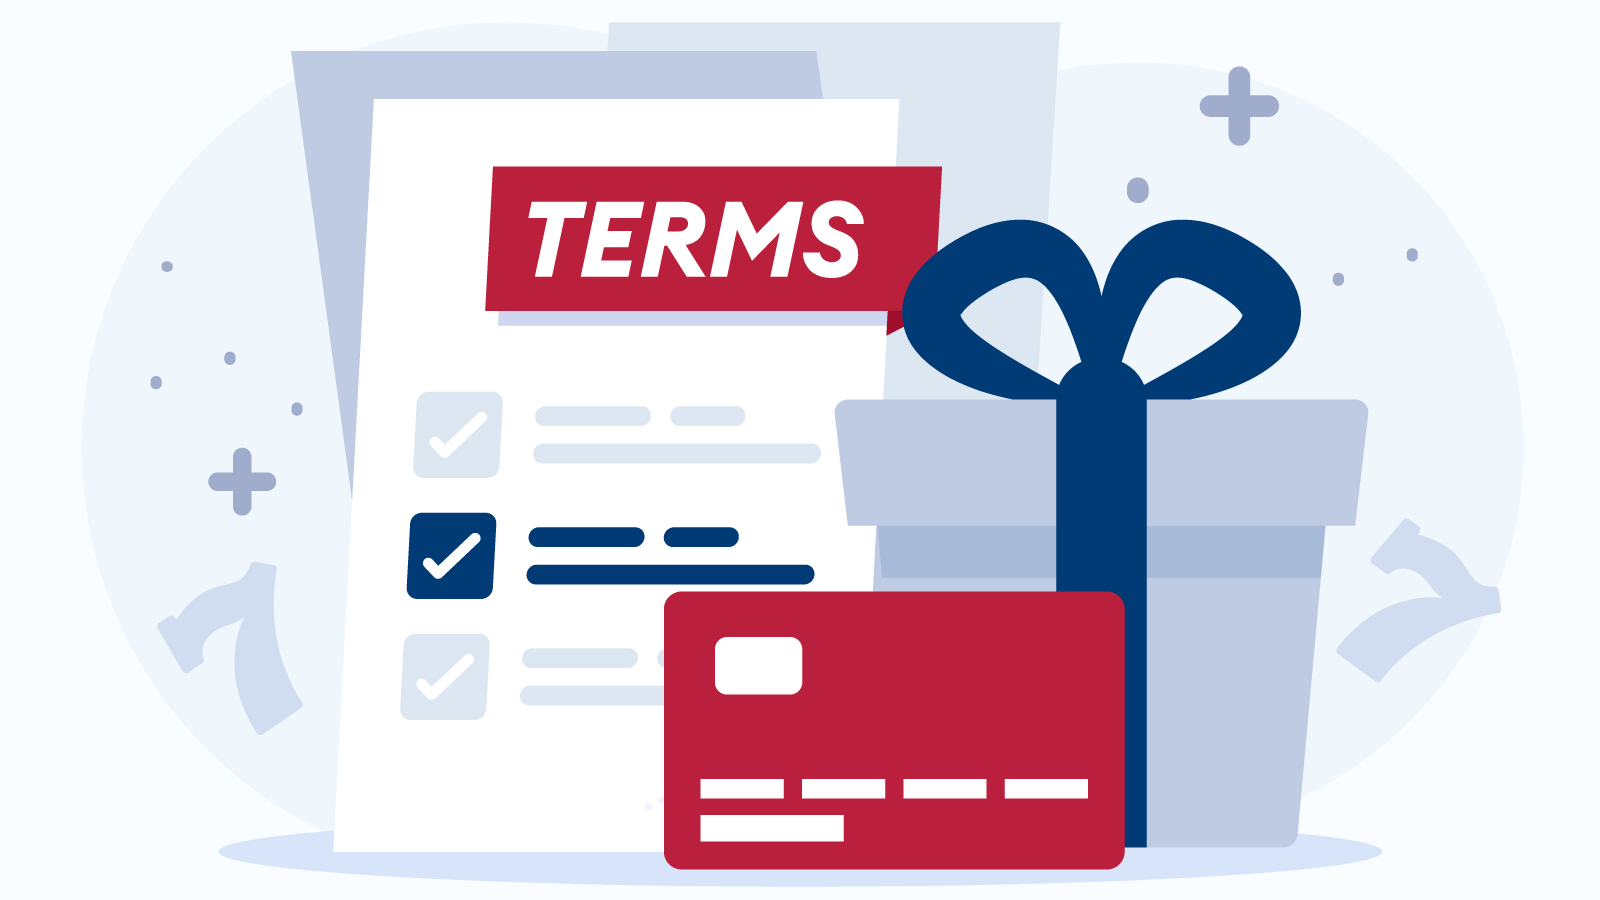 Before playing, consider the bonus terms